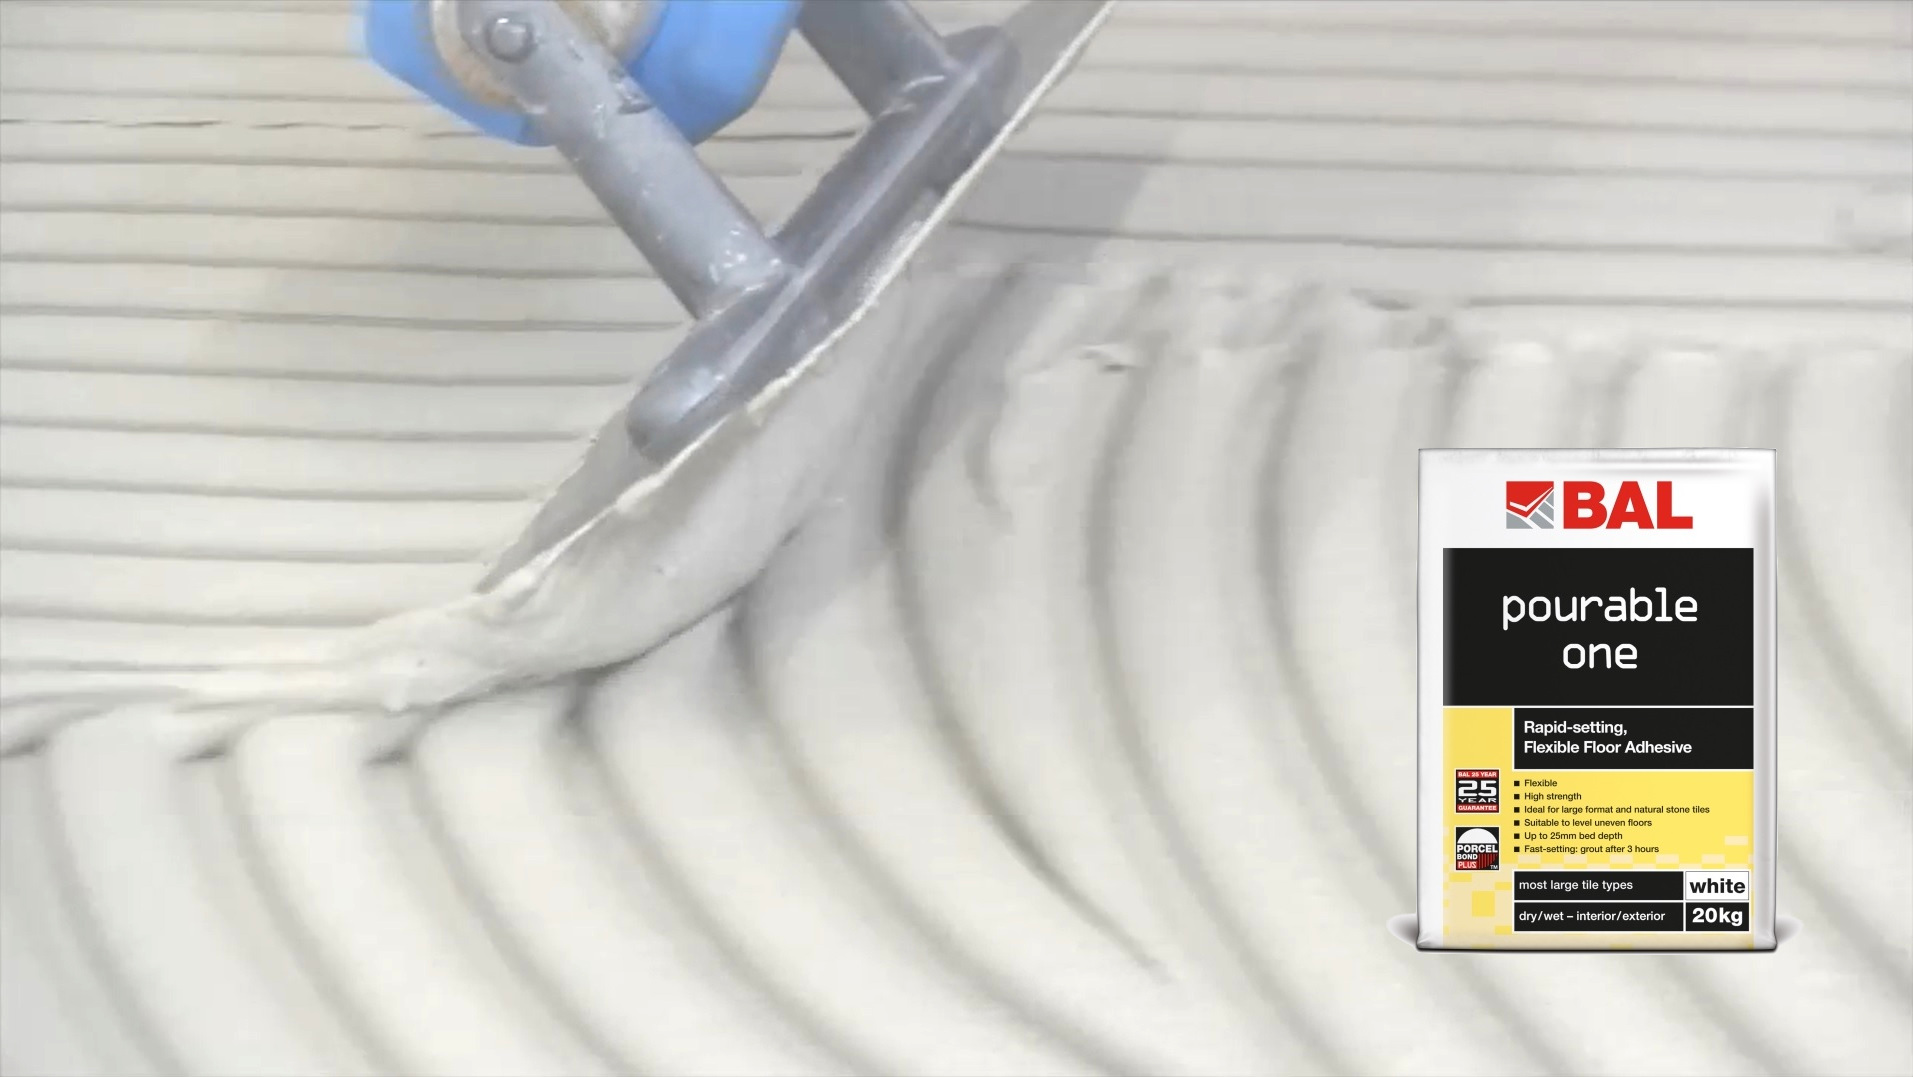 BAL Pourable One makes floor tiling easy @BALtiling